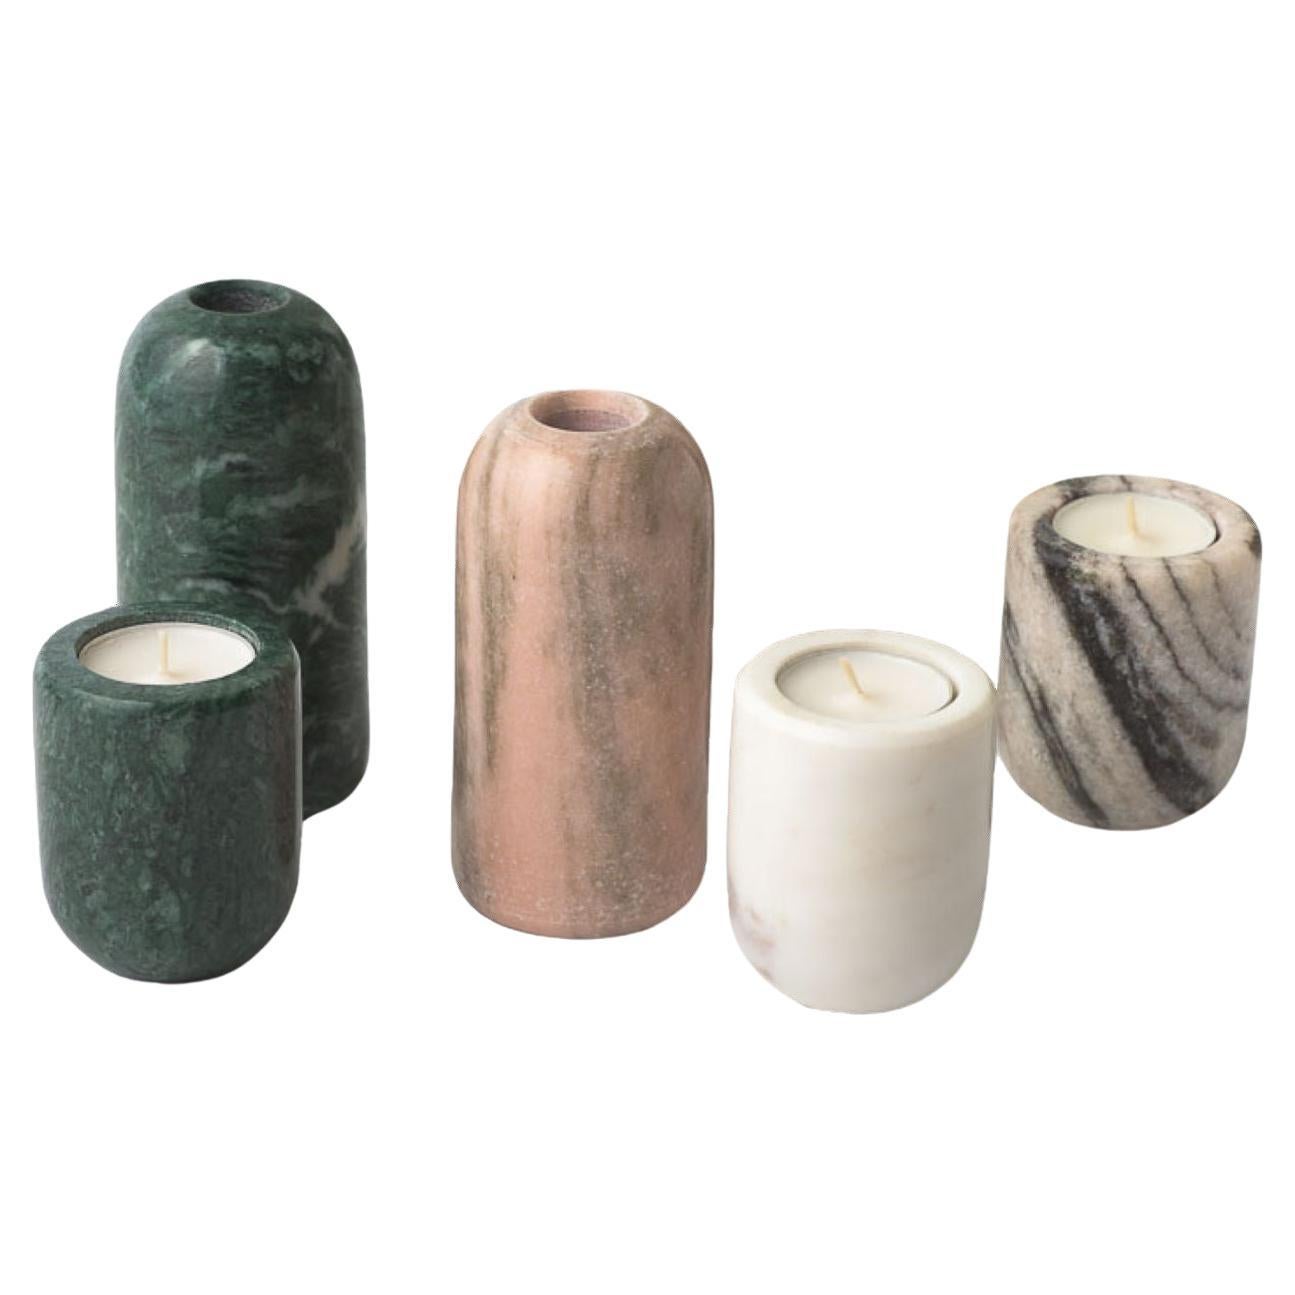 The Reversible Hand Carved Cosmos Marble Holder By Kunaal Kyhaan are the perfect accessories to add ambient lighting to an intimate dinner. Can be used for a regular long candle and a tea light candle when flipped. 
They come in 2 sizes and a